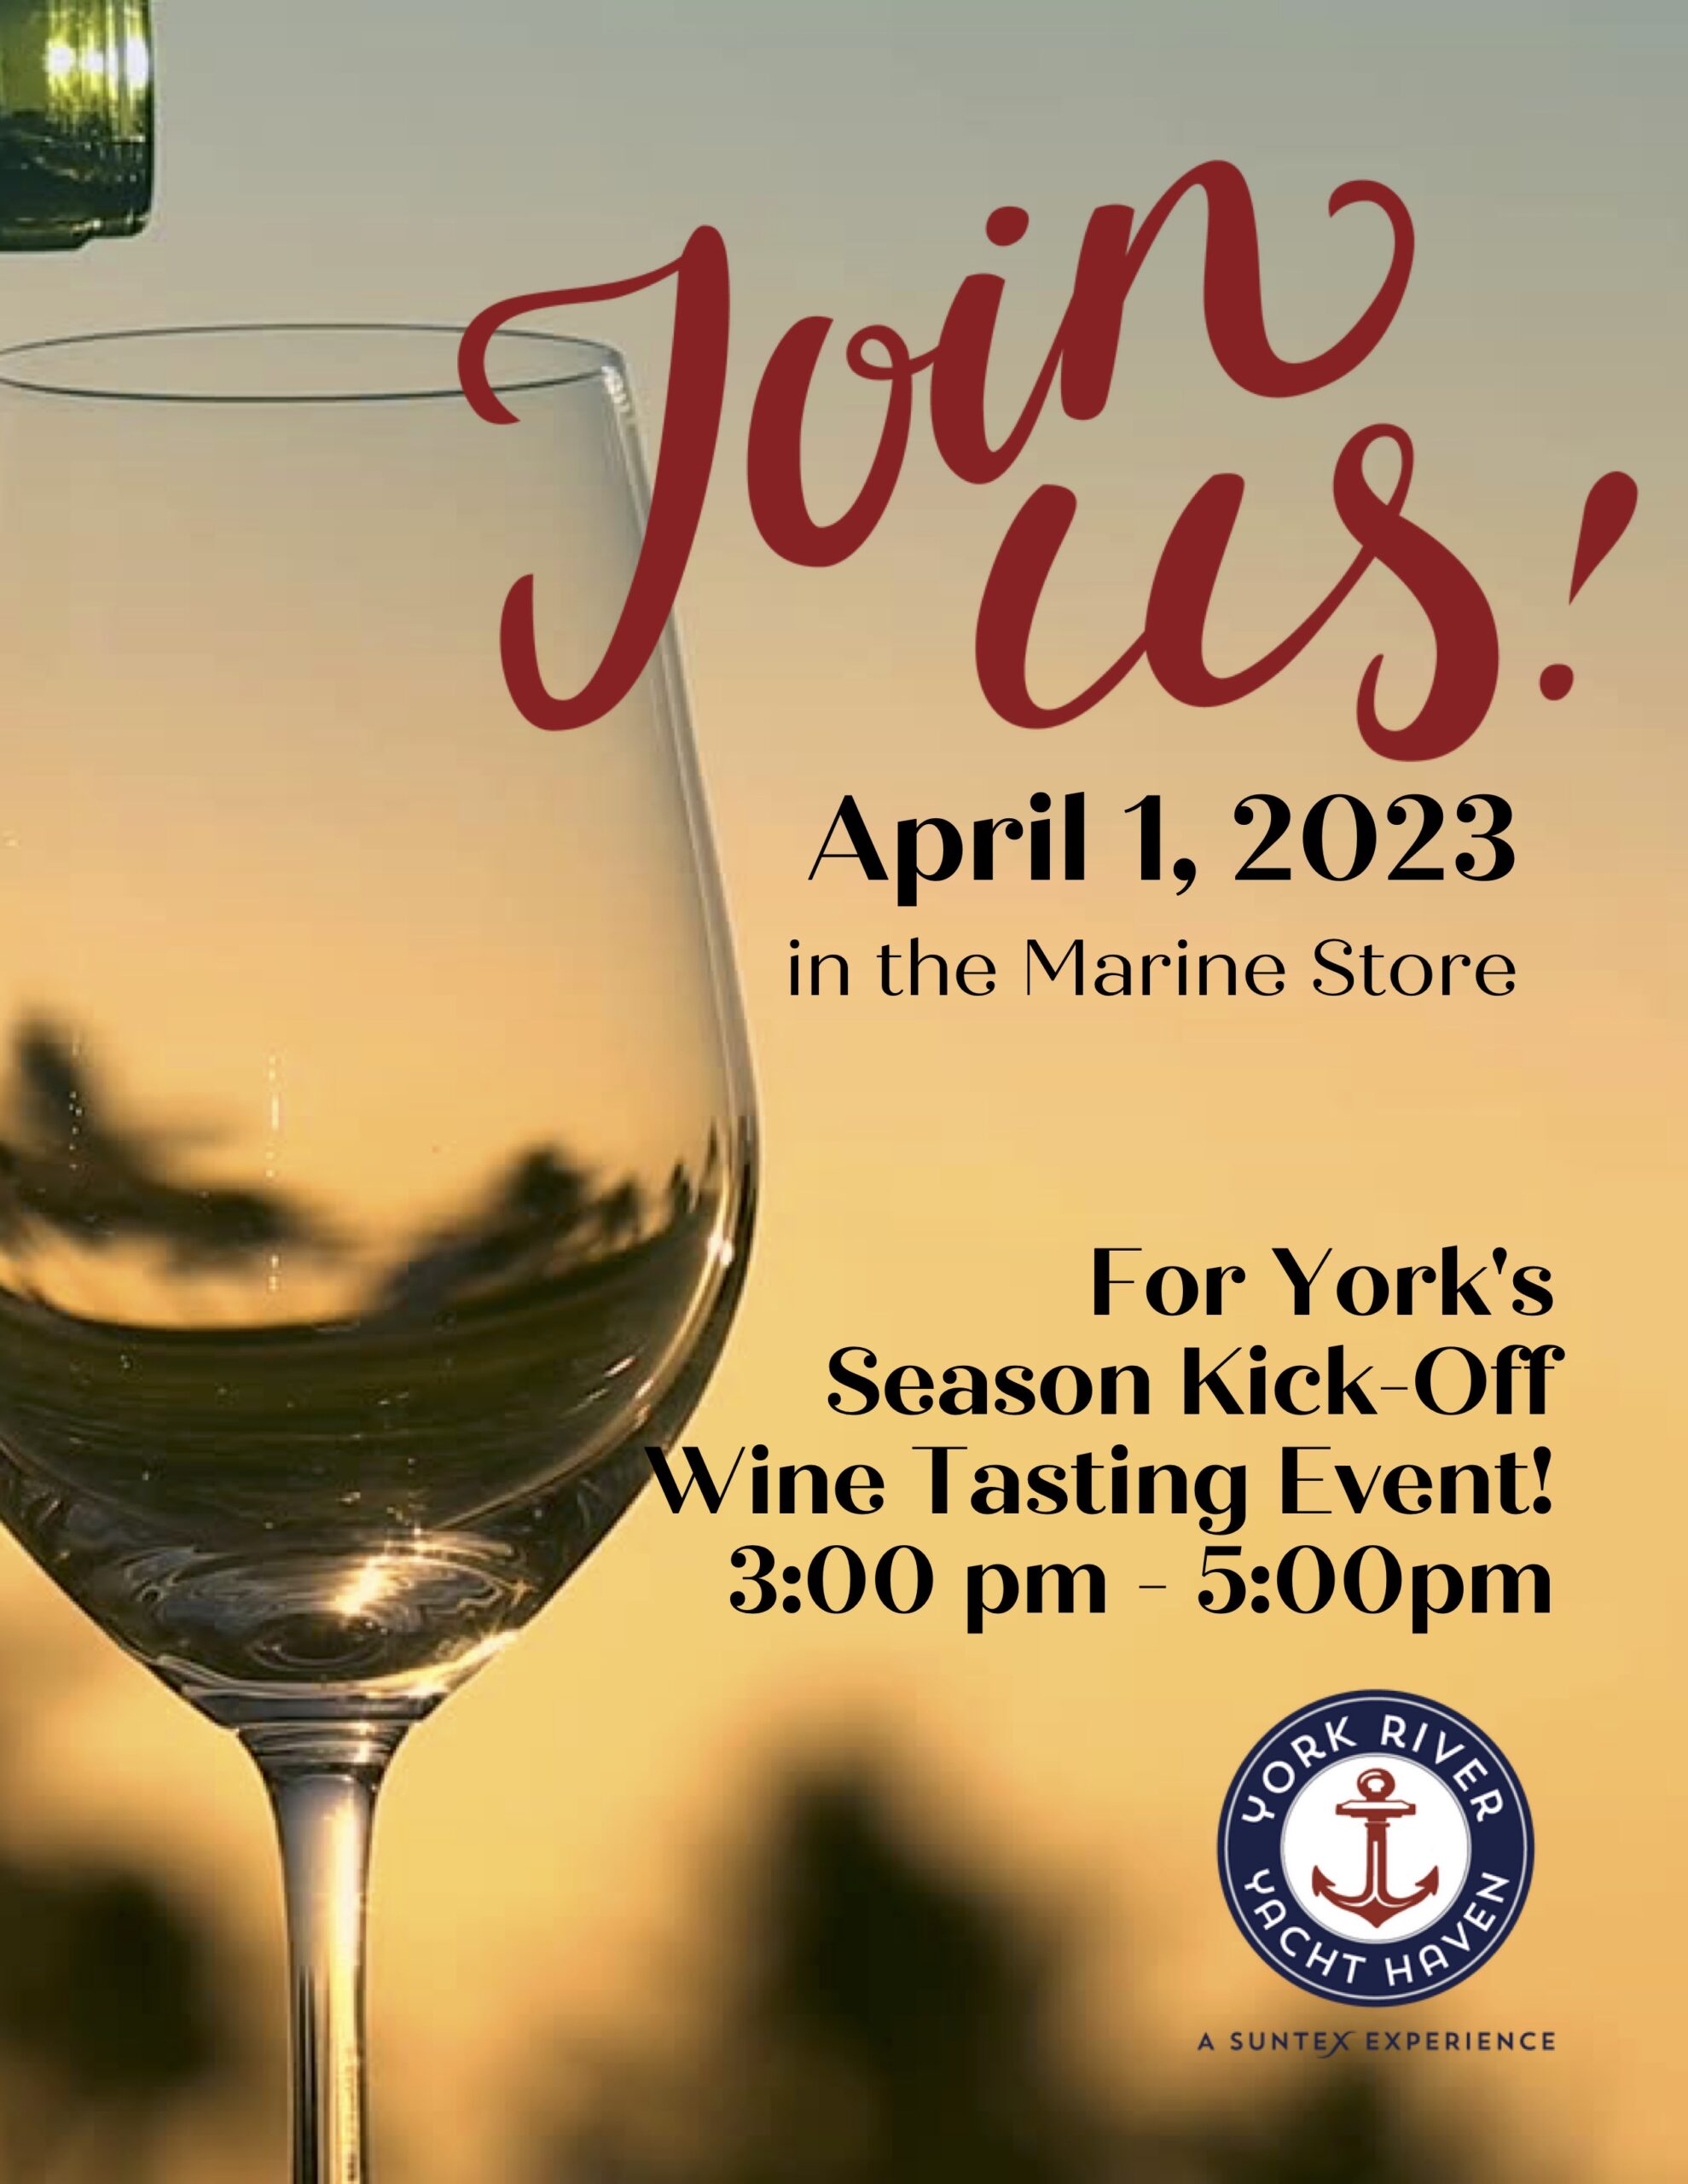 York River Yacht Haven Wine Tasting Event